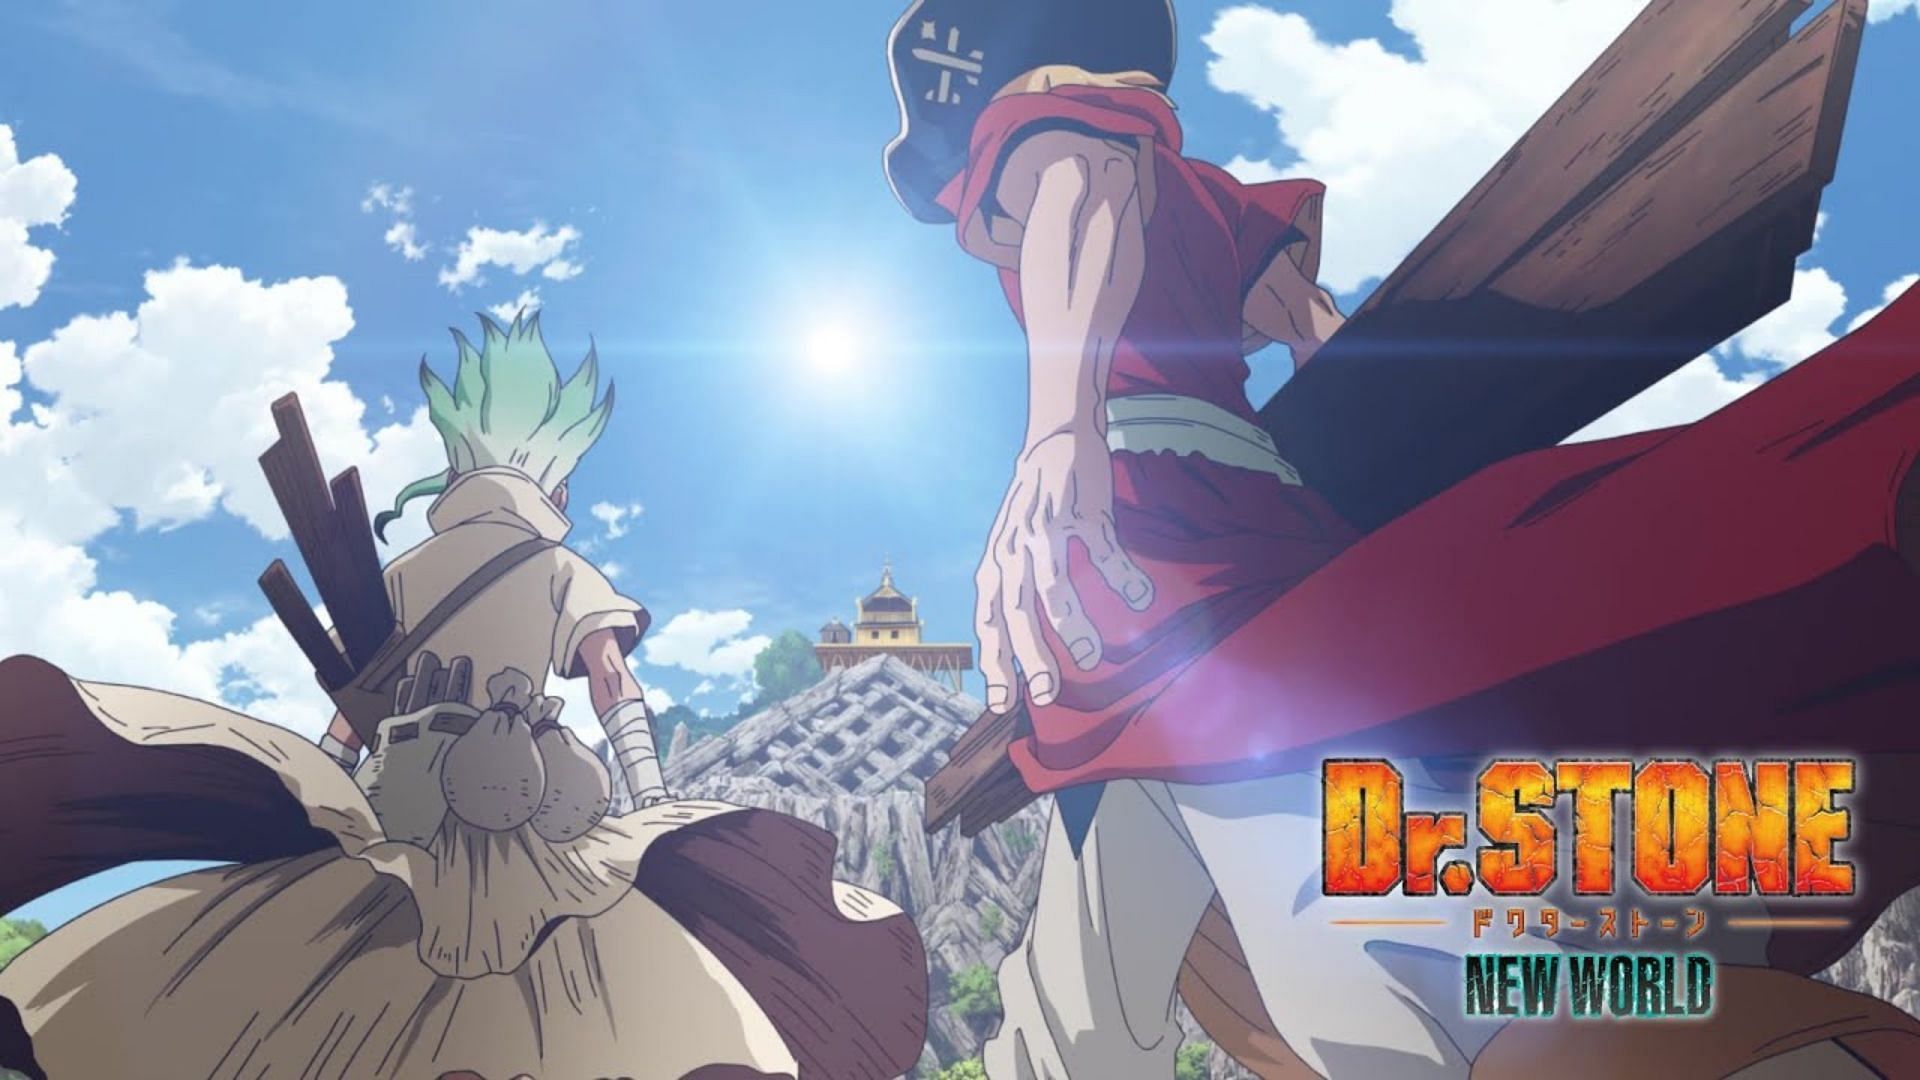 Dr. STONE Season 3 Cour 2: Release Date & Exact Time It Comes Out on  Crunchyroll! - Crunchyroll News